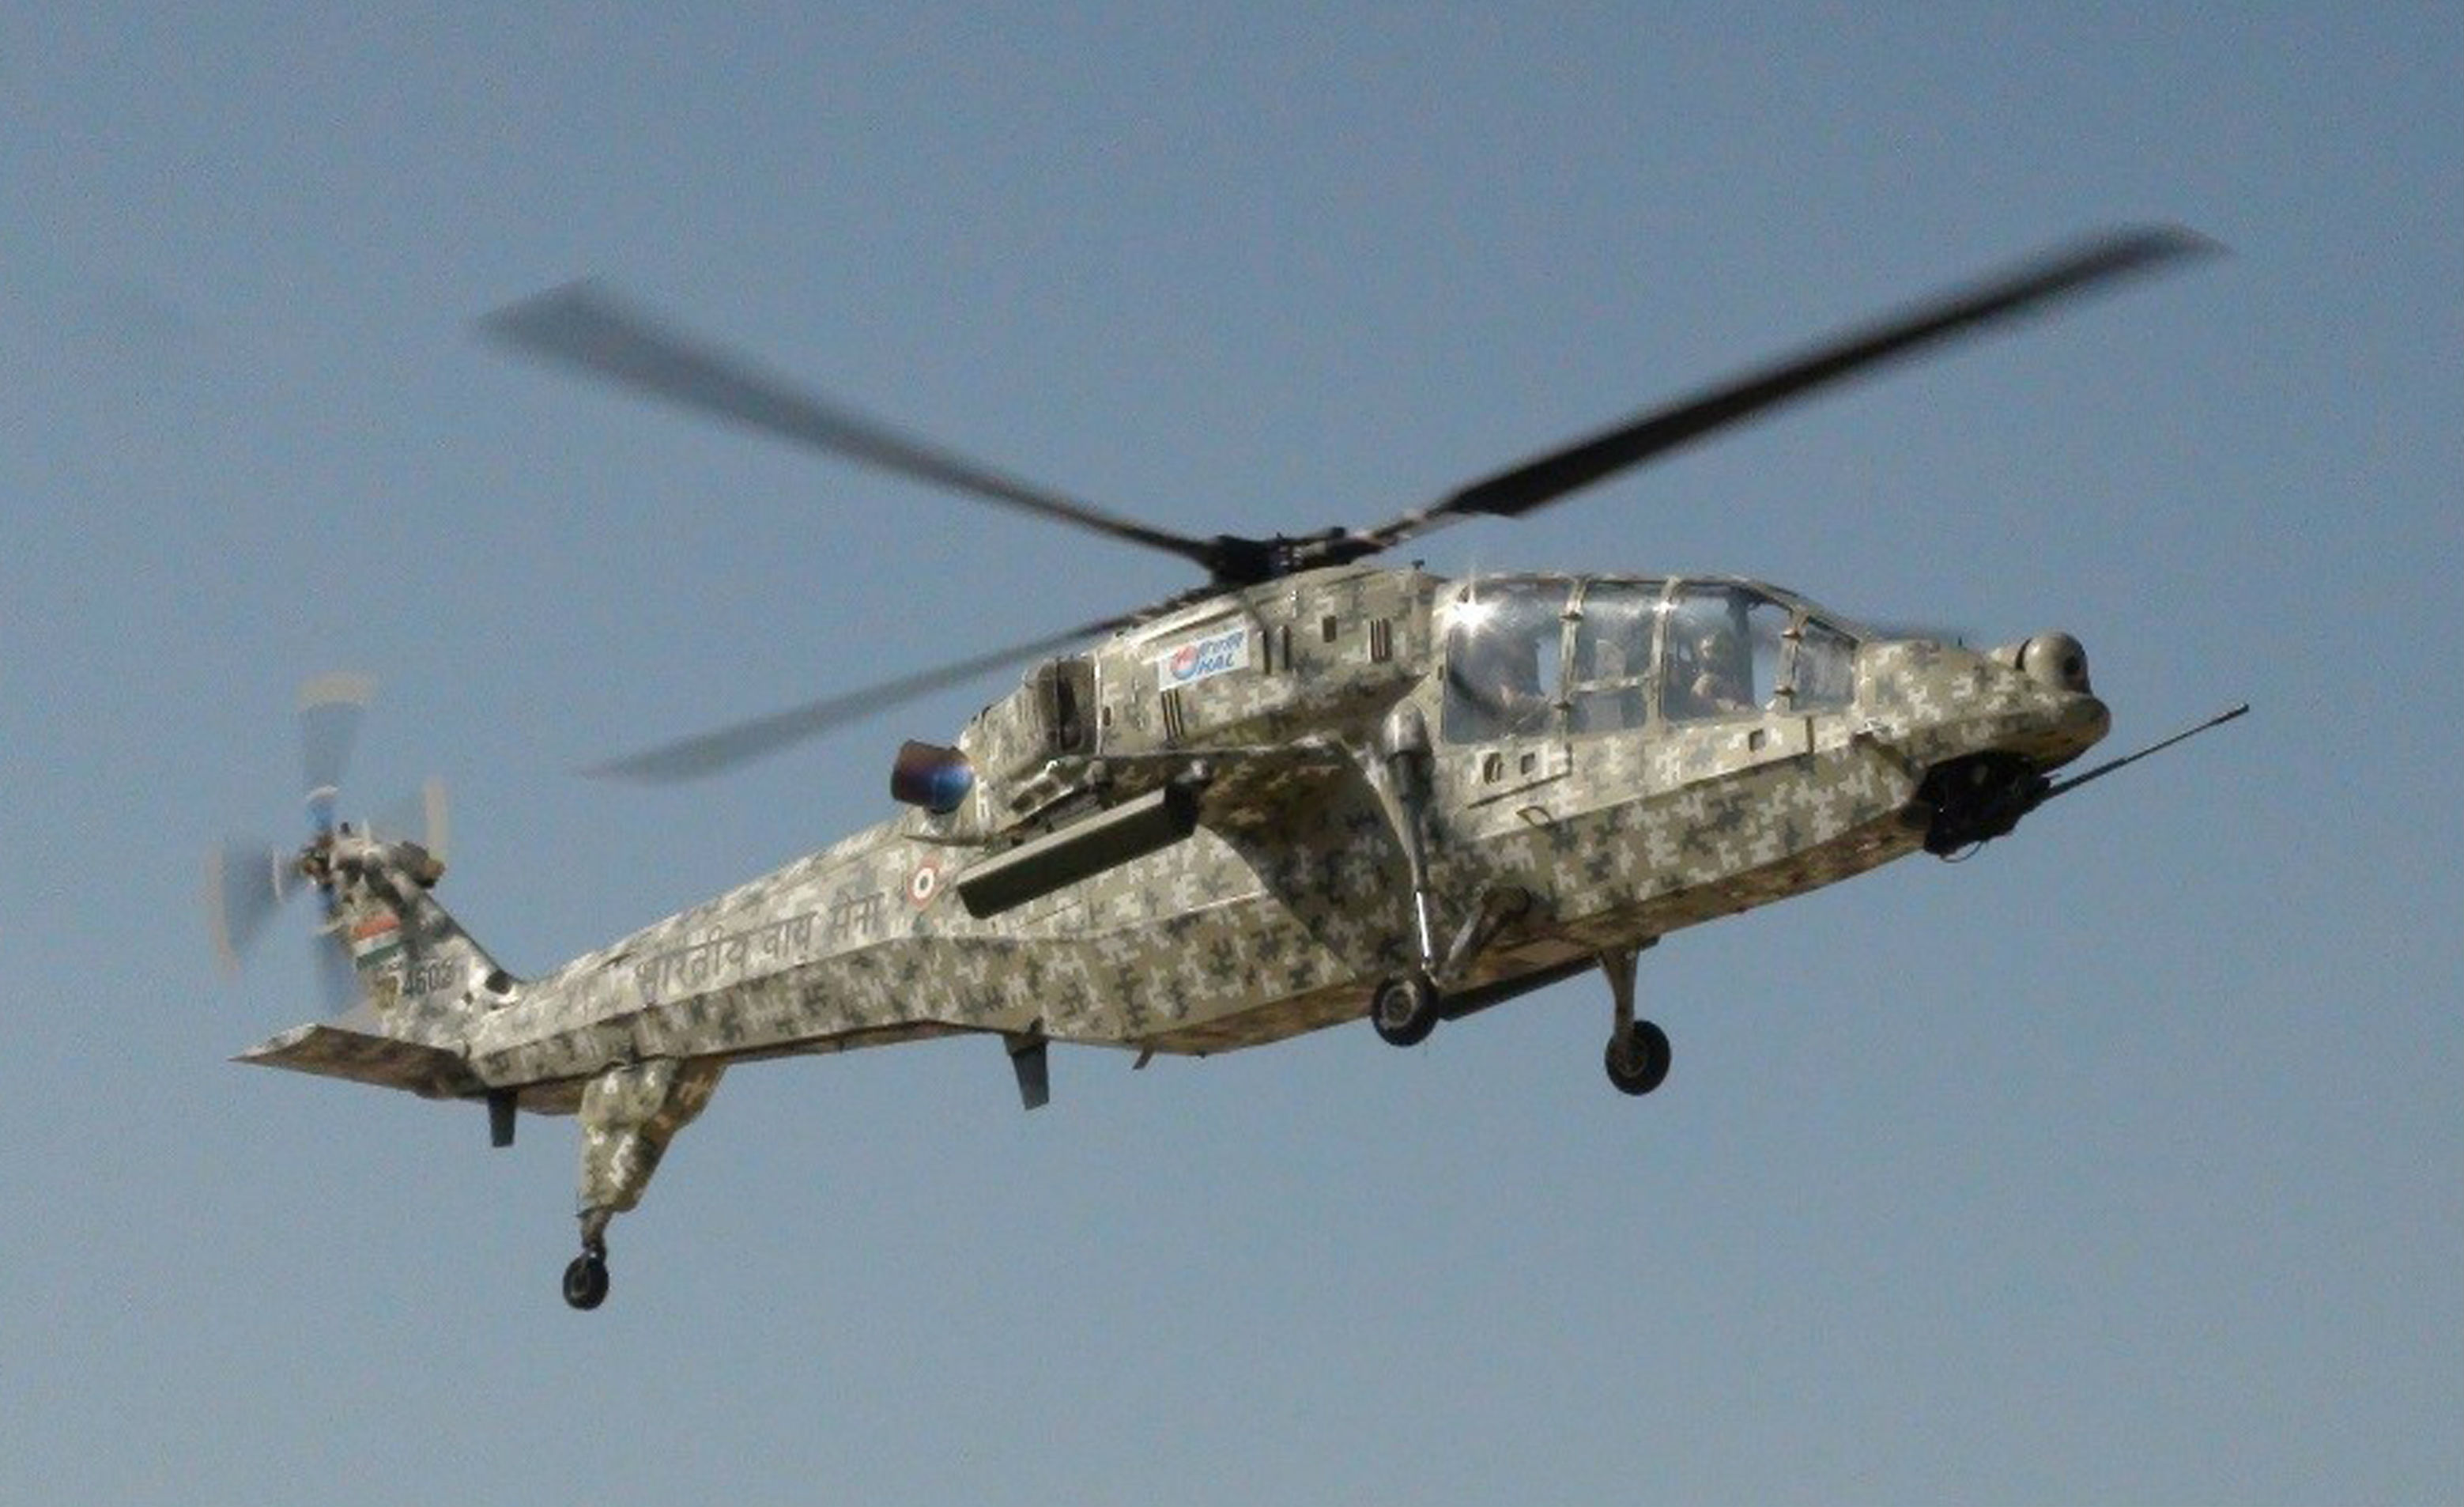 HAL described the maiden flight of LCH as “flawless.” The helicopter flew for 20 minutes with the engagement of the AFCS system throughout. HAL Photo